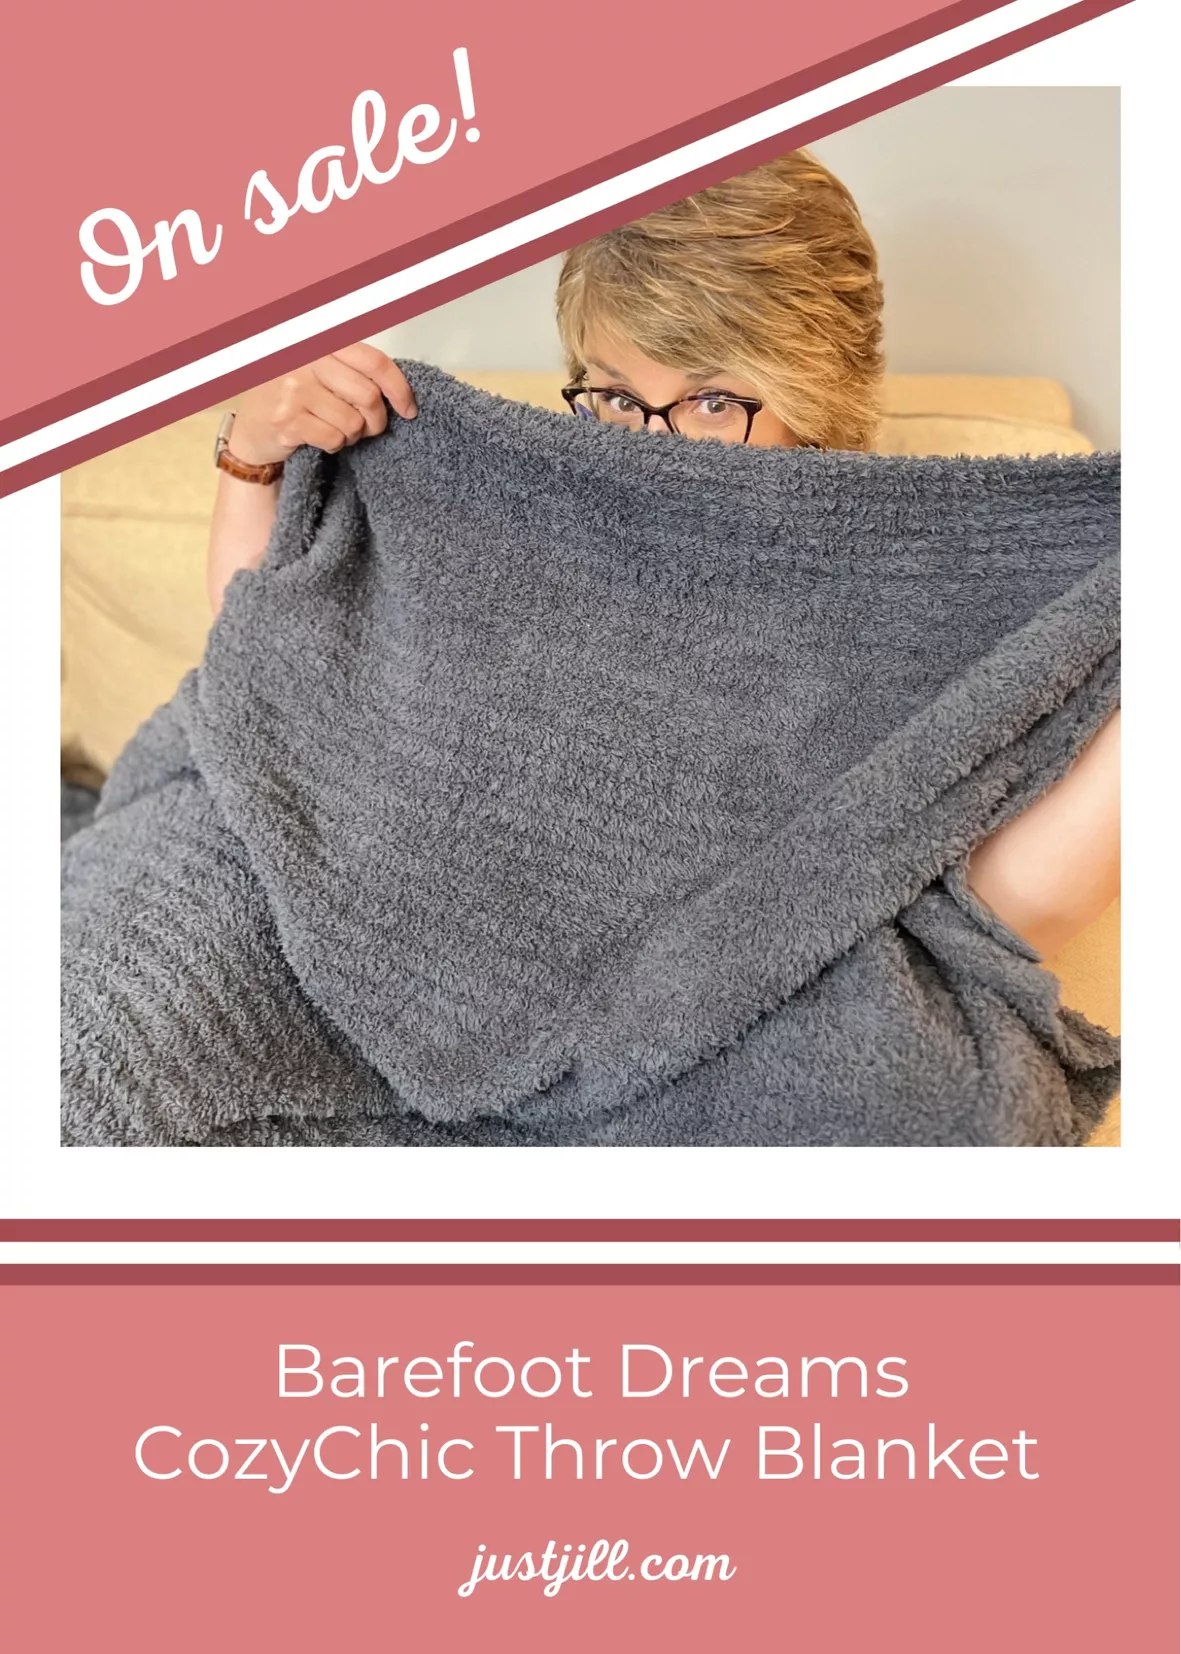 Nordstrom Anniversary sale: Barefoot Dreams blankets and more on sale